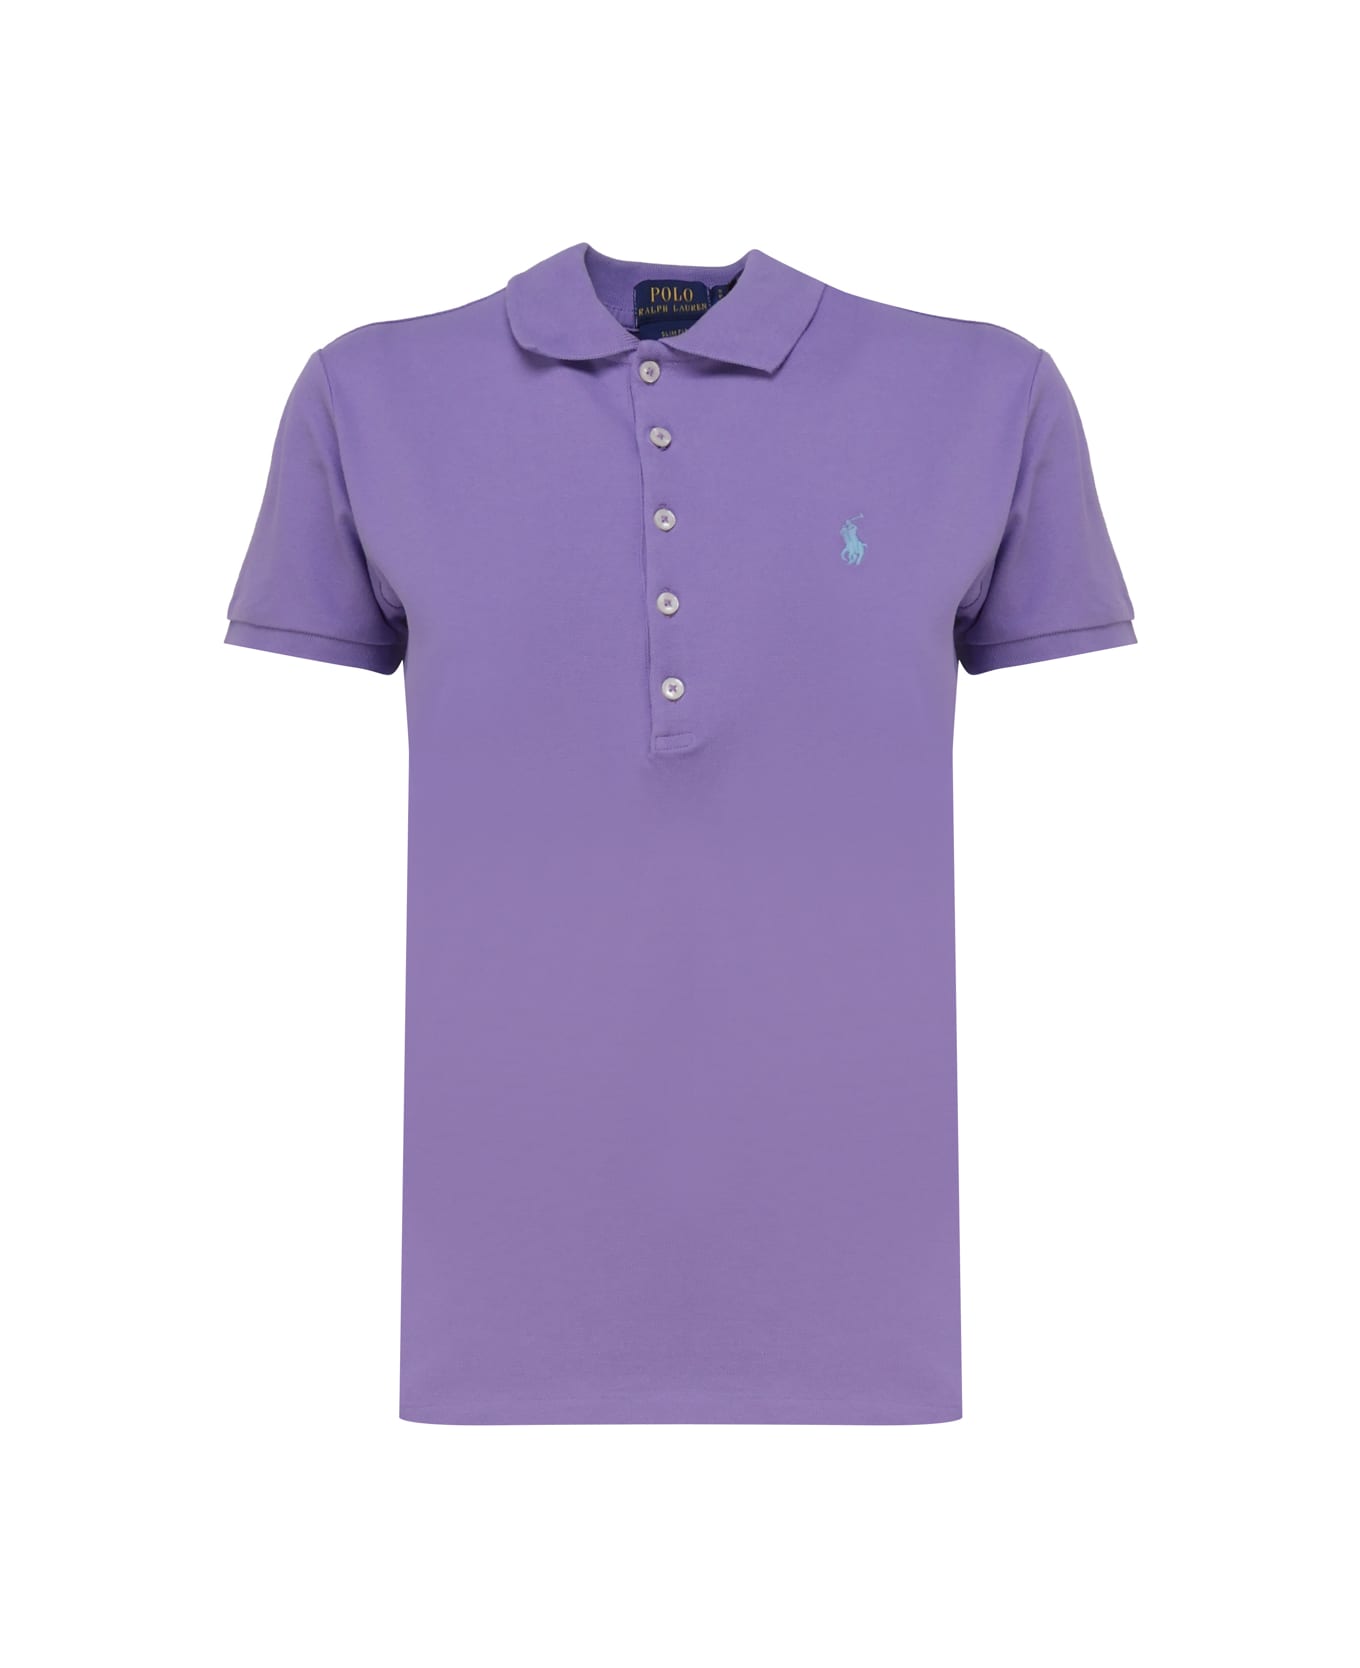 Polo Ralph Lauren Polo With Julie Embroidery - Cactus Purple